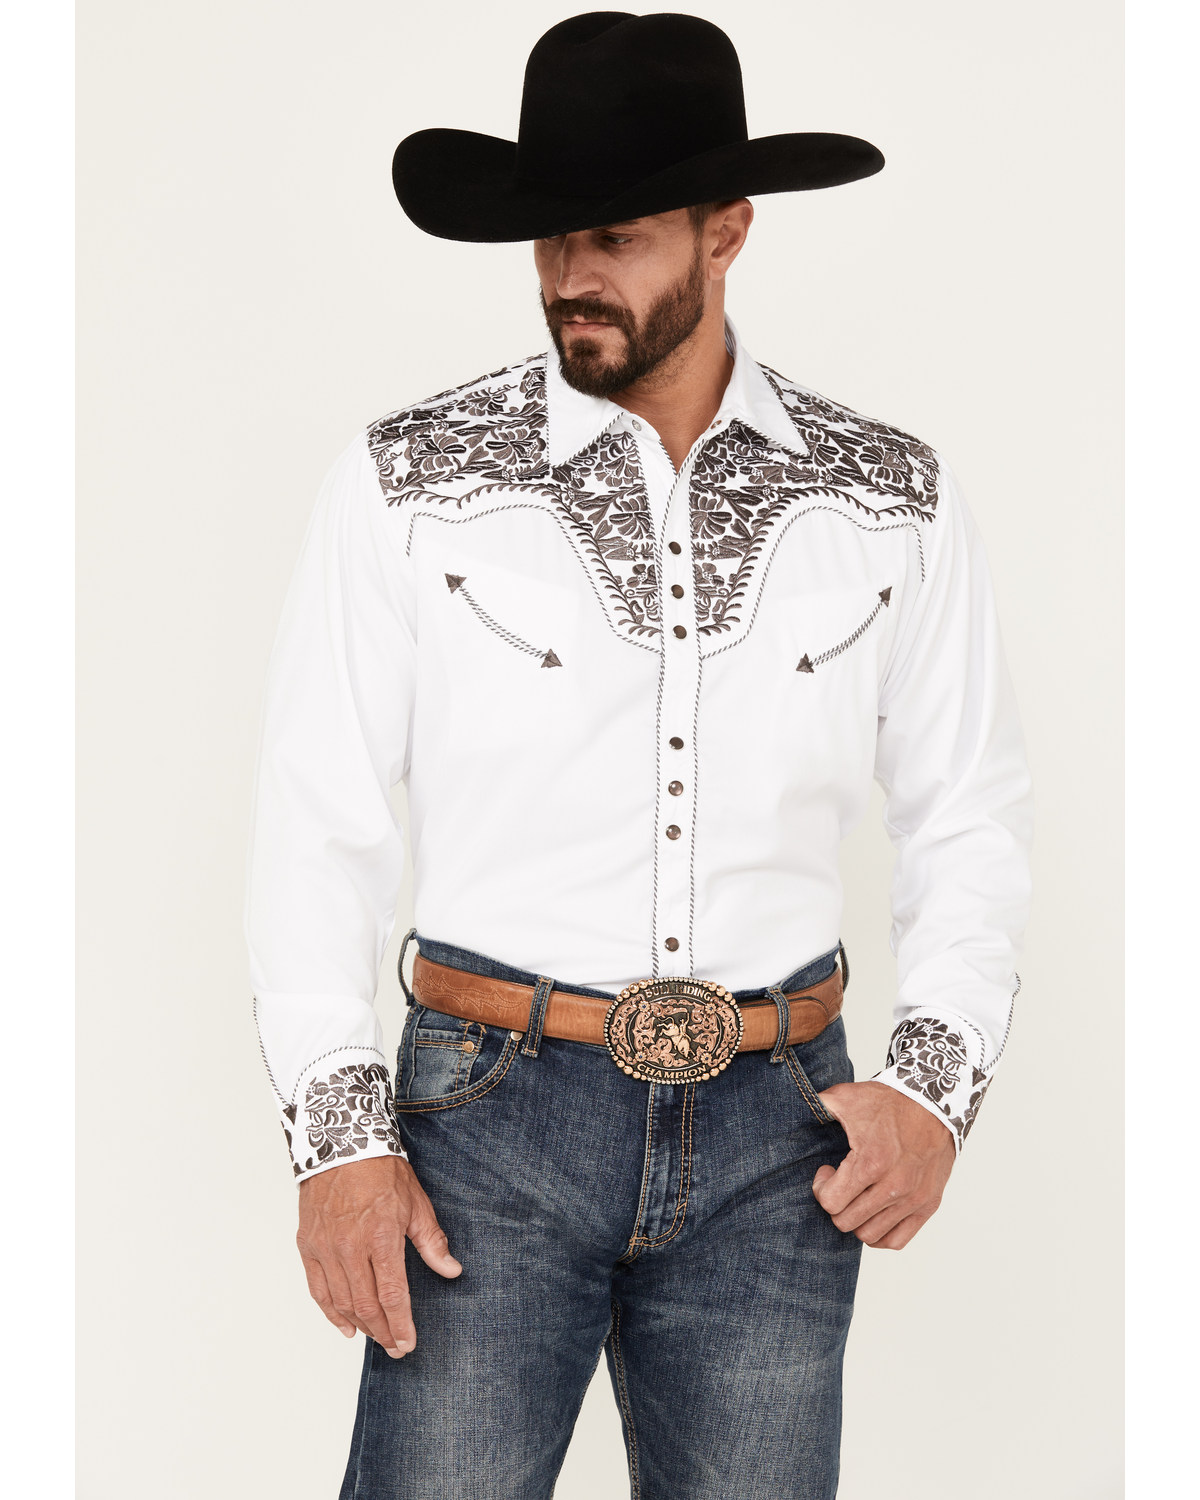 P-634X-CHA-BIG Scully Men's Charcoal Embroidered Gunfighter Shirt Big 